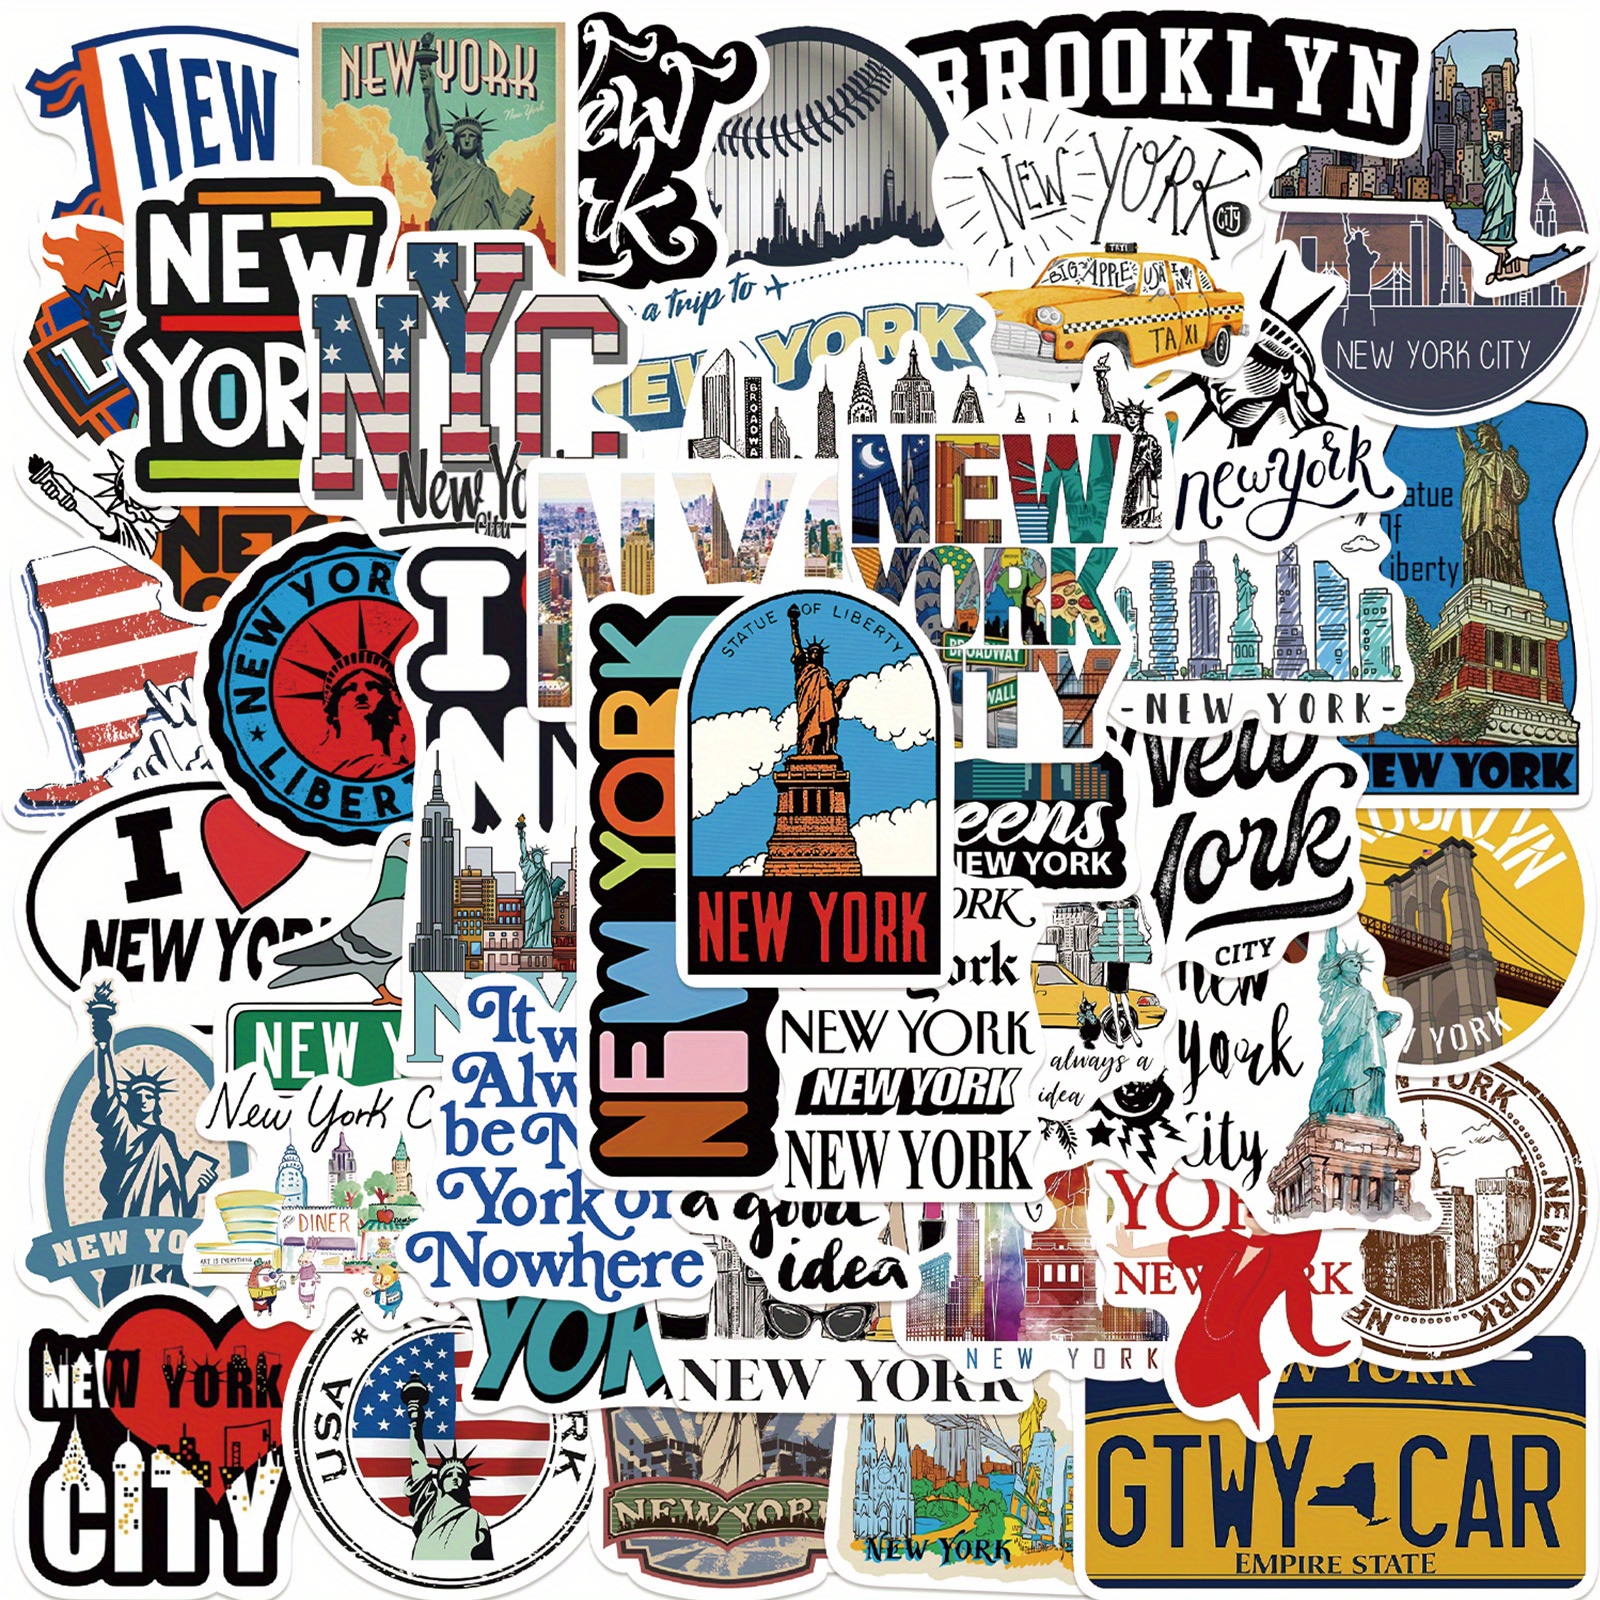 

50pcs New York Waterproof Doodle Sticker, Laptop Phone Case Luggage Water Bottle Cup Skateboard Car Accessories Diy Creative Motorcycles Stickers